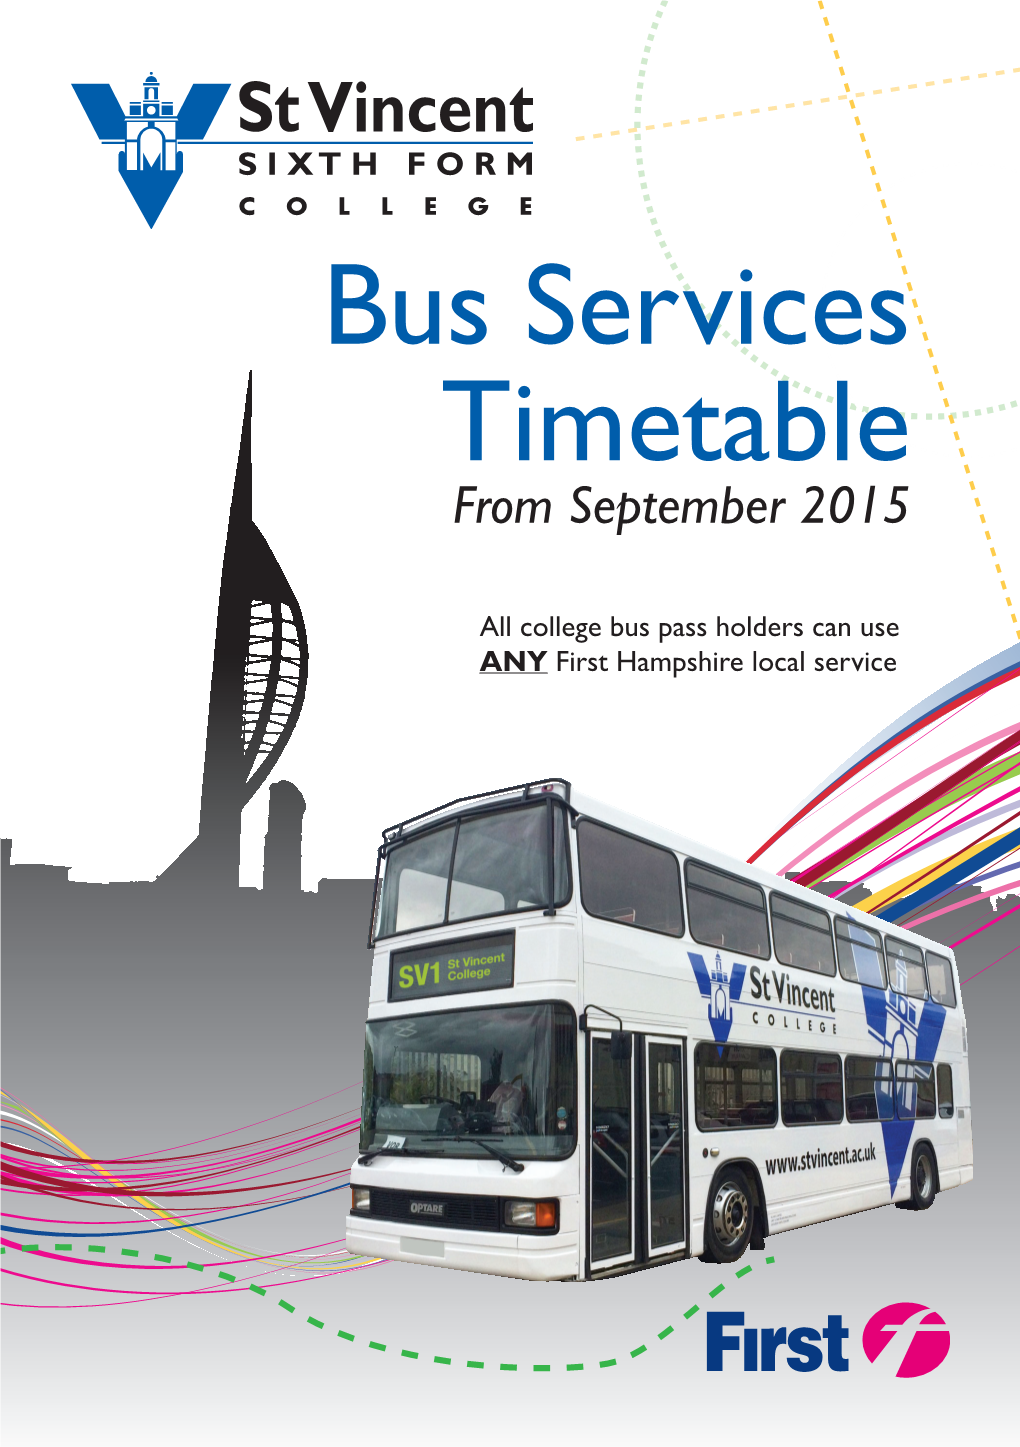 Bus Services Timetable from September 2015